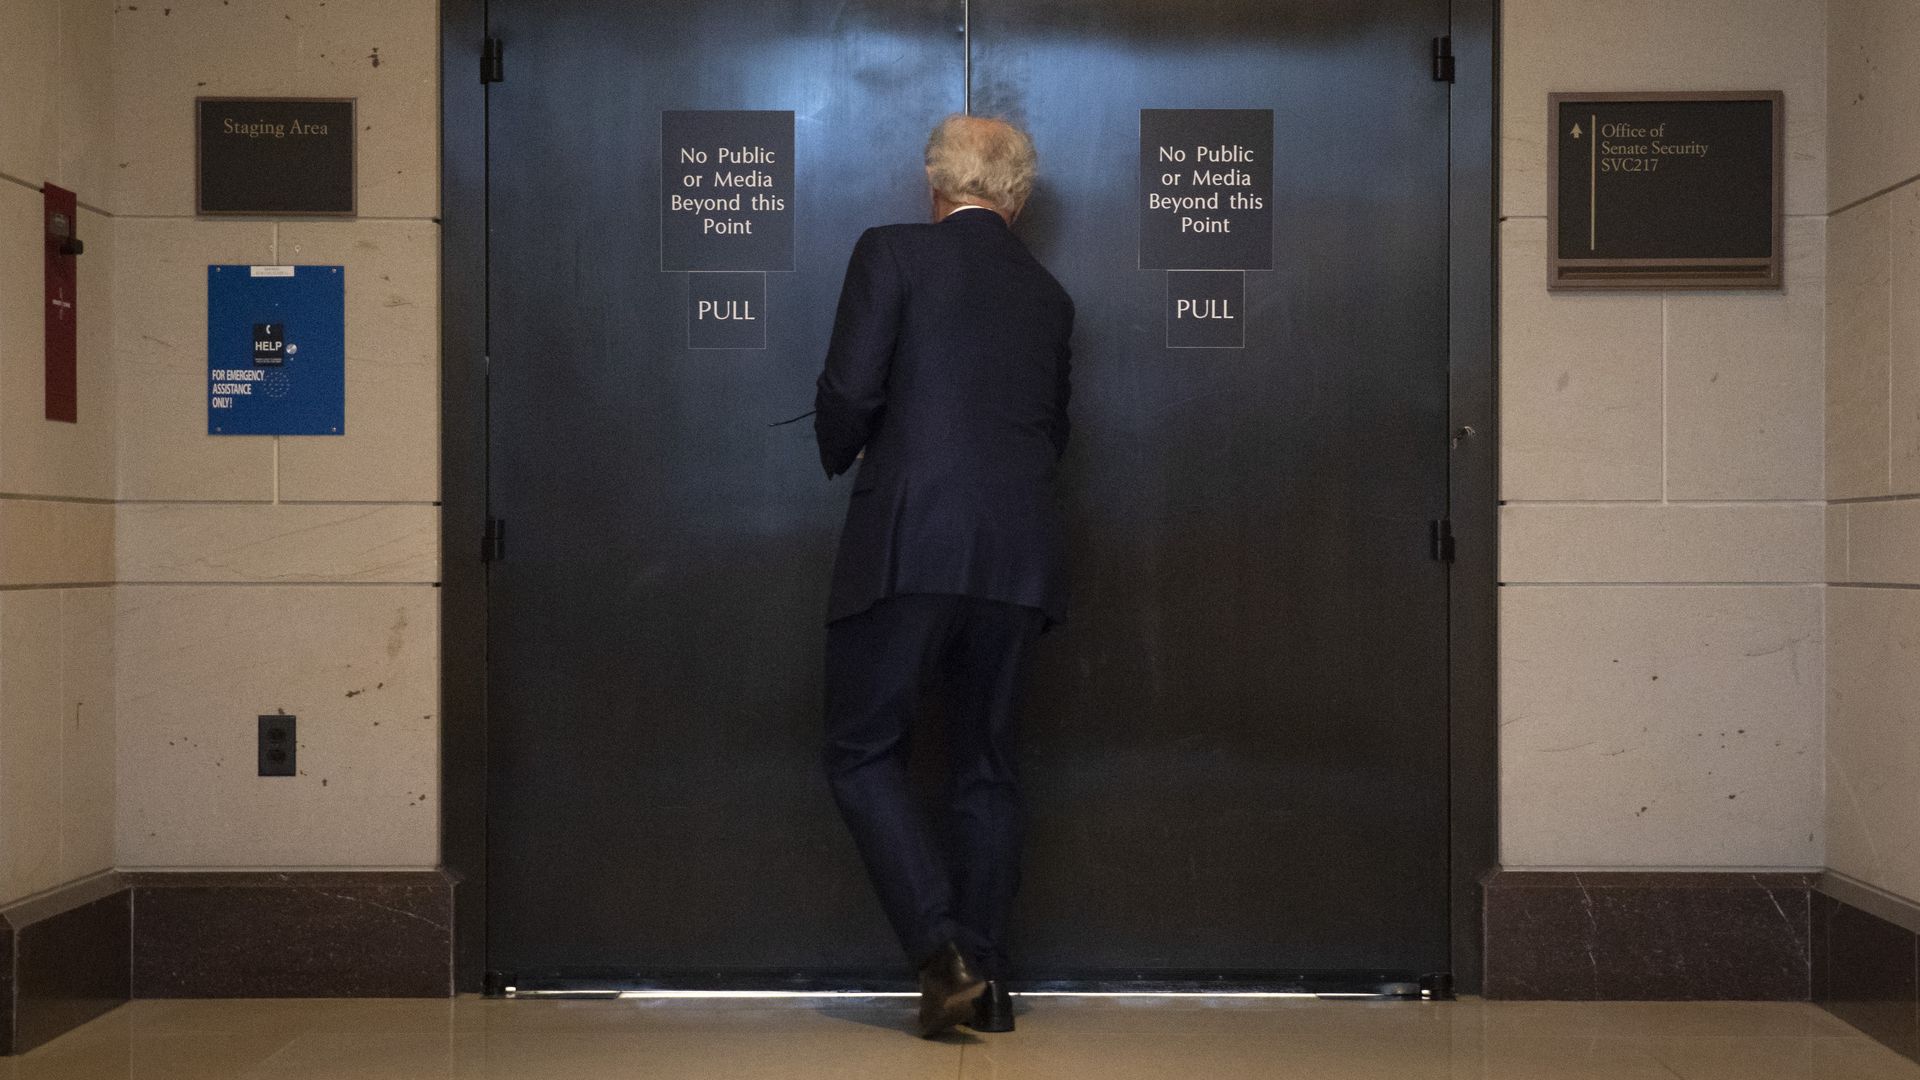 Senator Bob Corkers enters a room labeled "No Public or Media Beyond This Point," where senators reviewed the FBI report on Kavanaugh